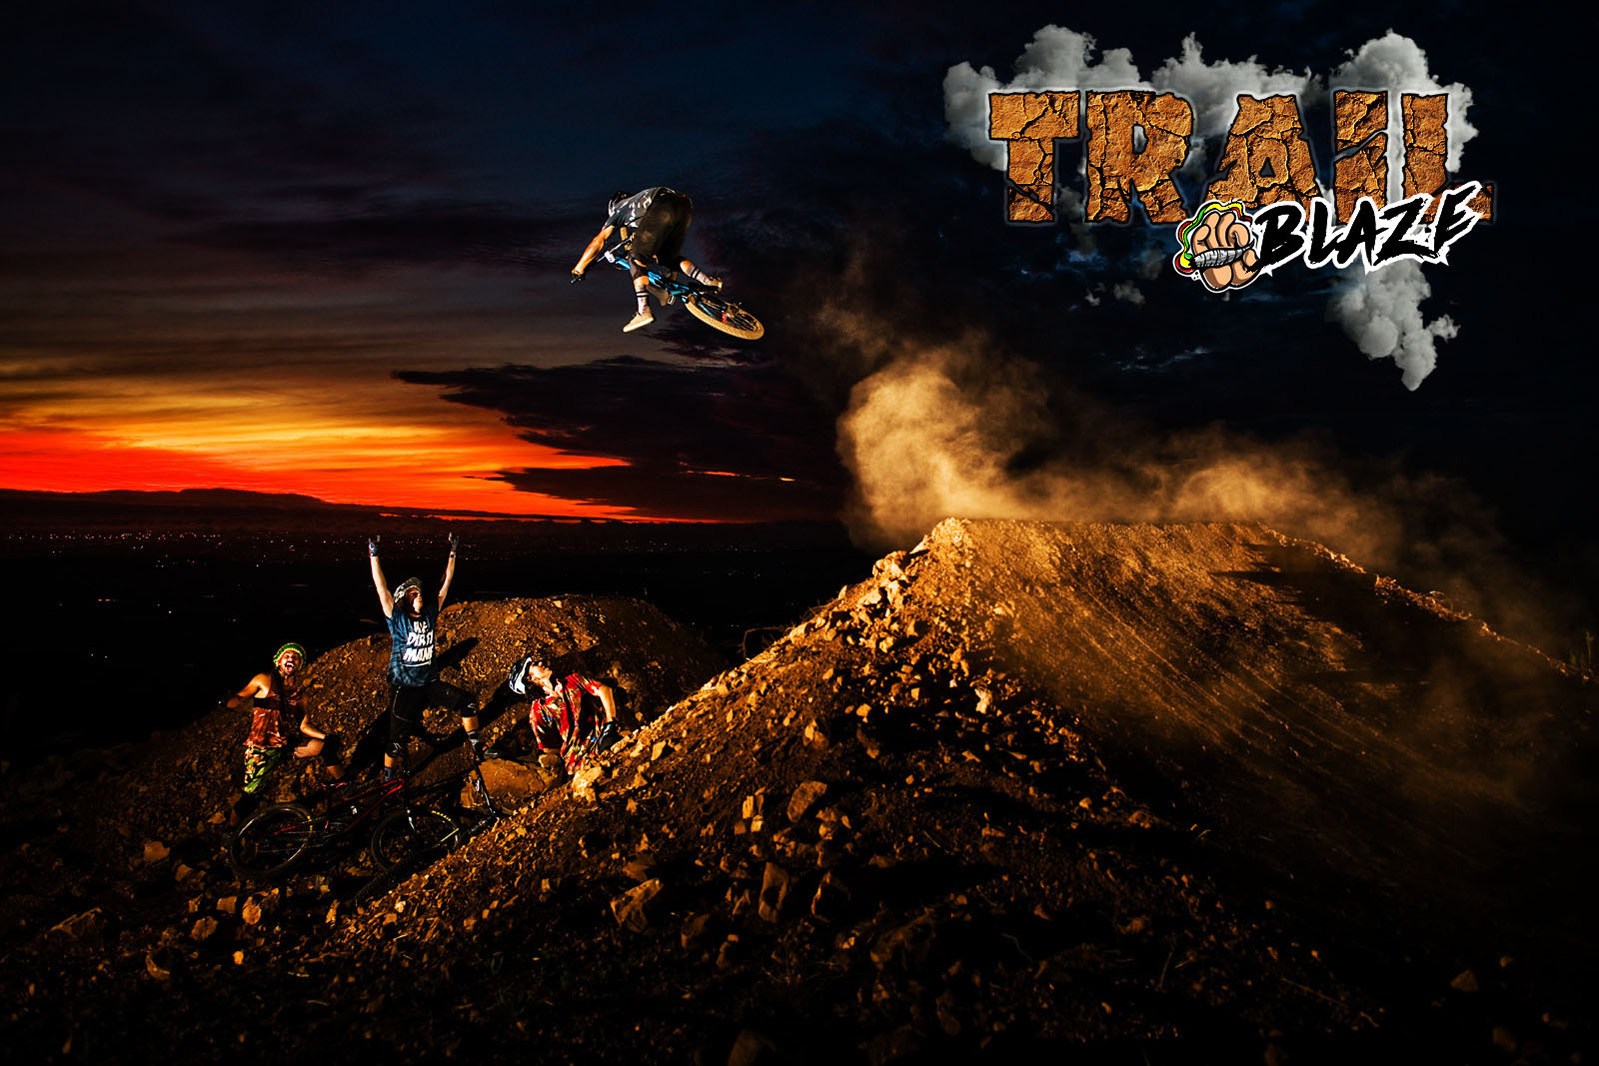 Get away from the serious side of MTB & come have a laugh with the Trail Blaze Crew!